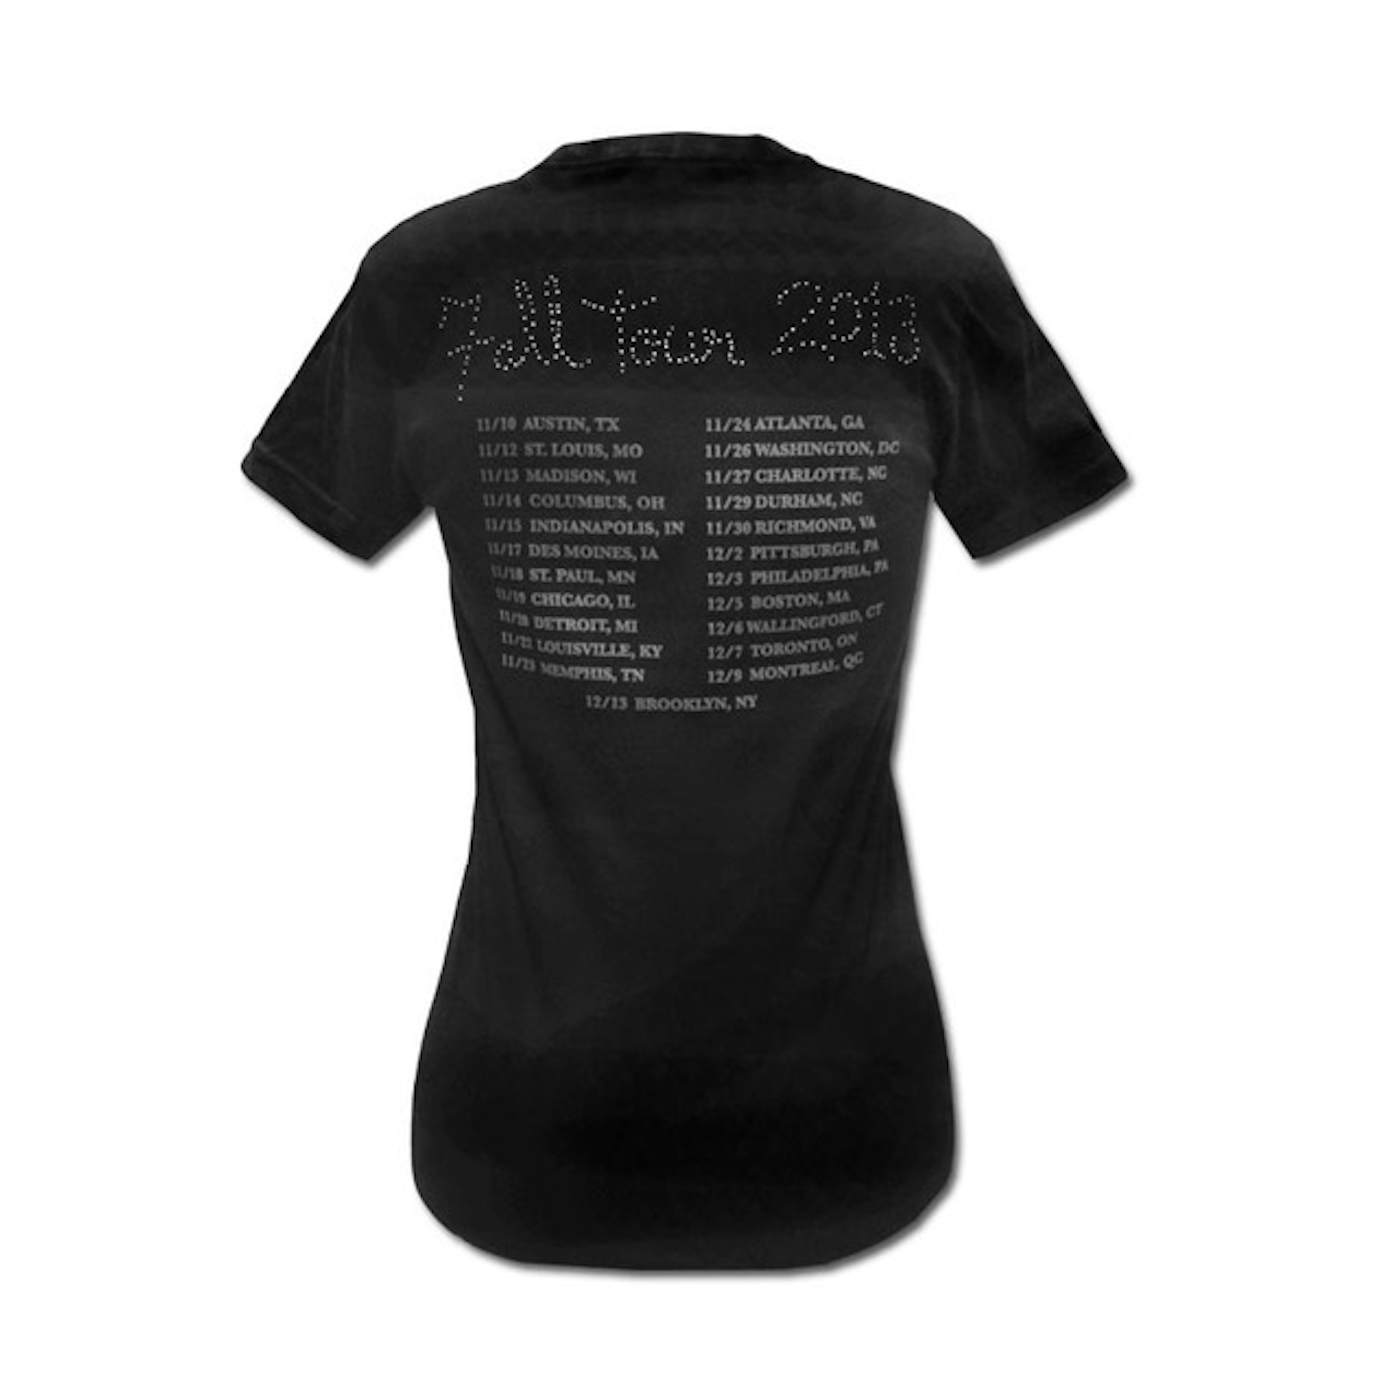 MGMT Girl's Faces Fall 2013 Tour T-shirt